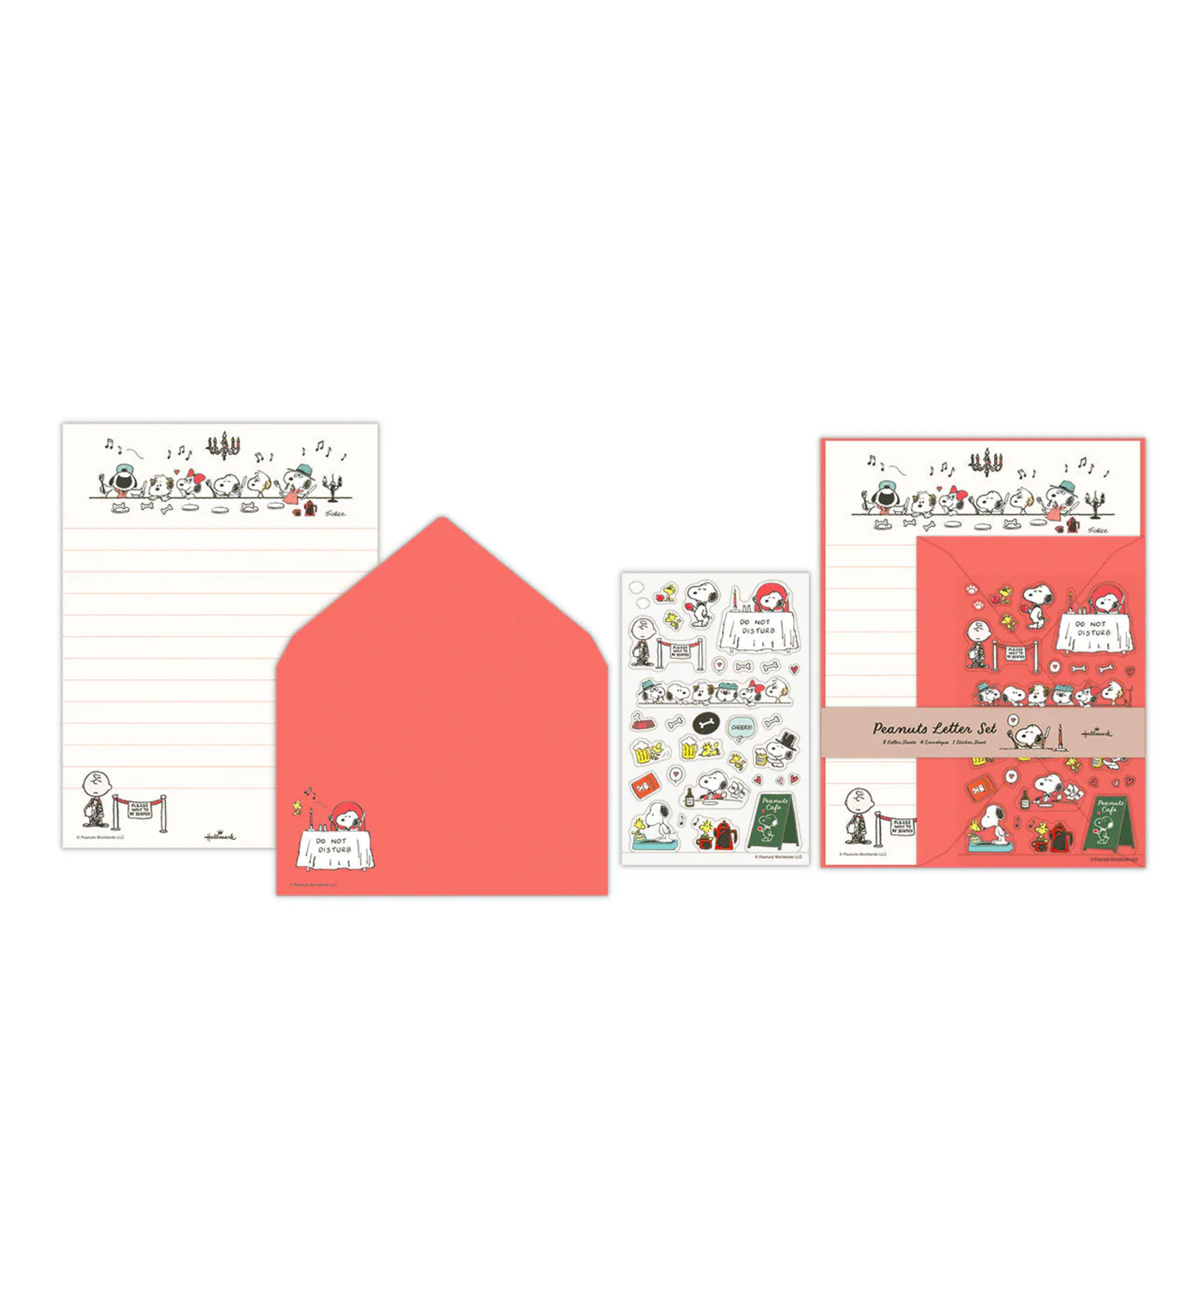 Peanuts Snoopy Stay Positive Letter Set [Red]